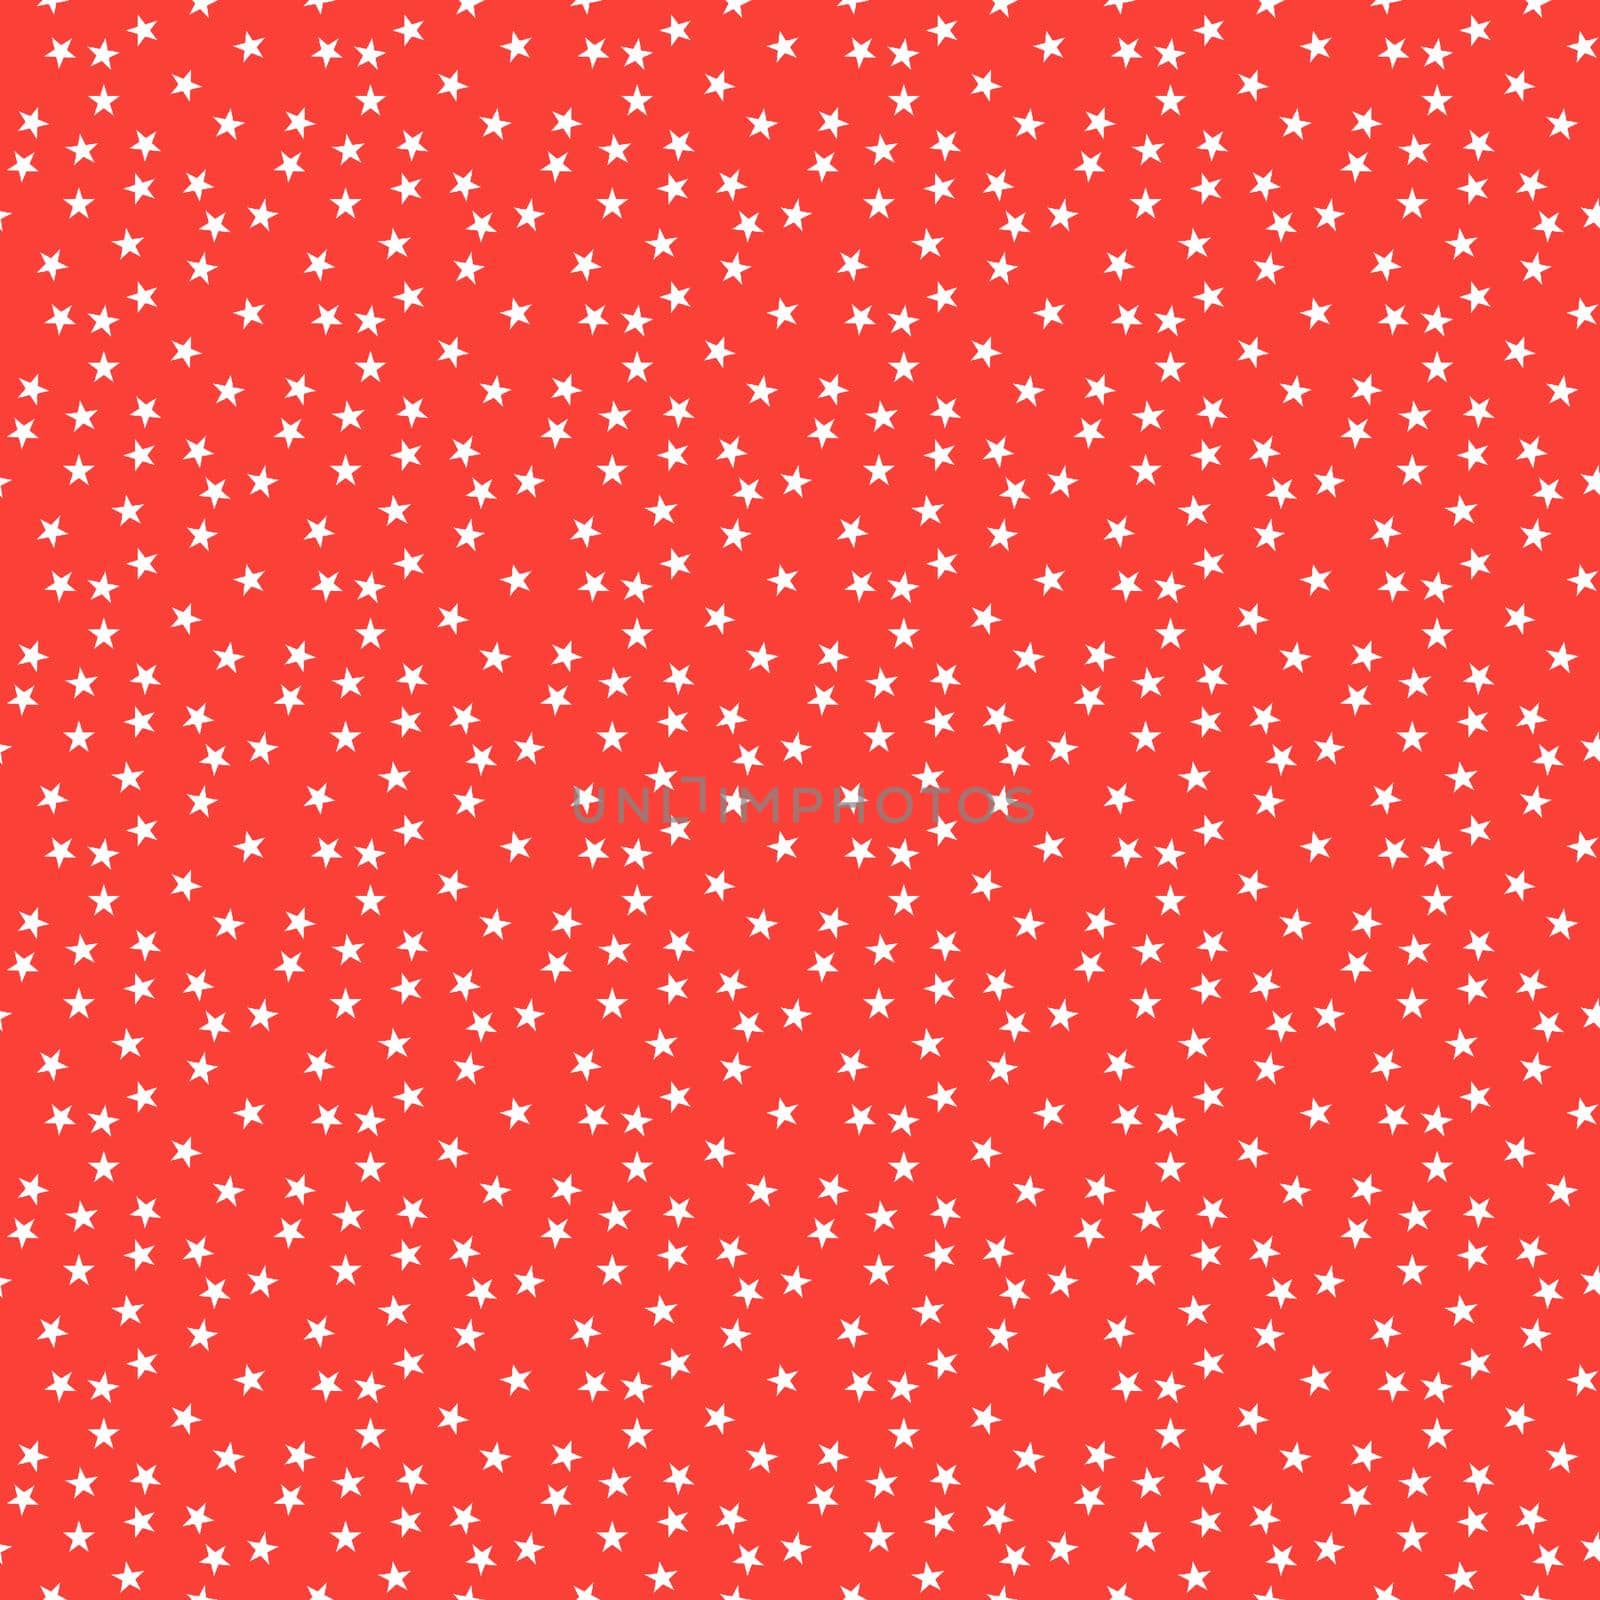 Background image a large number of white stars on a red background